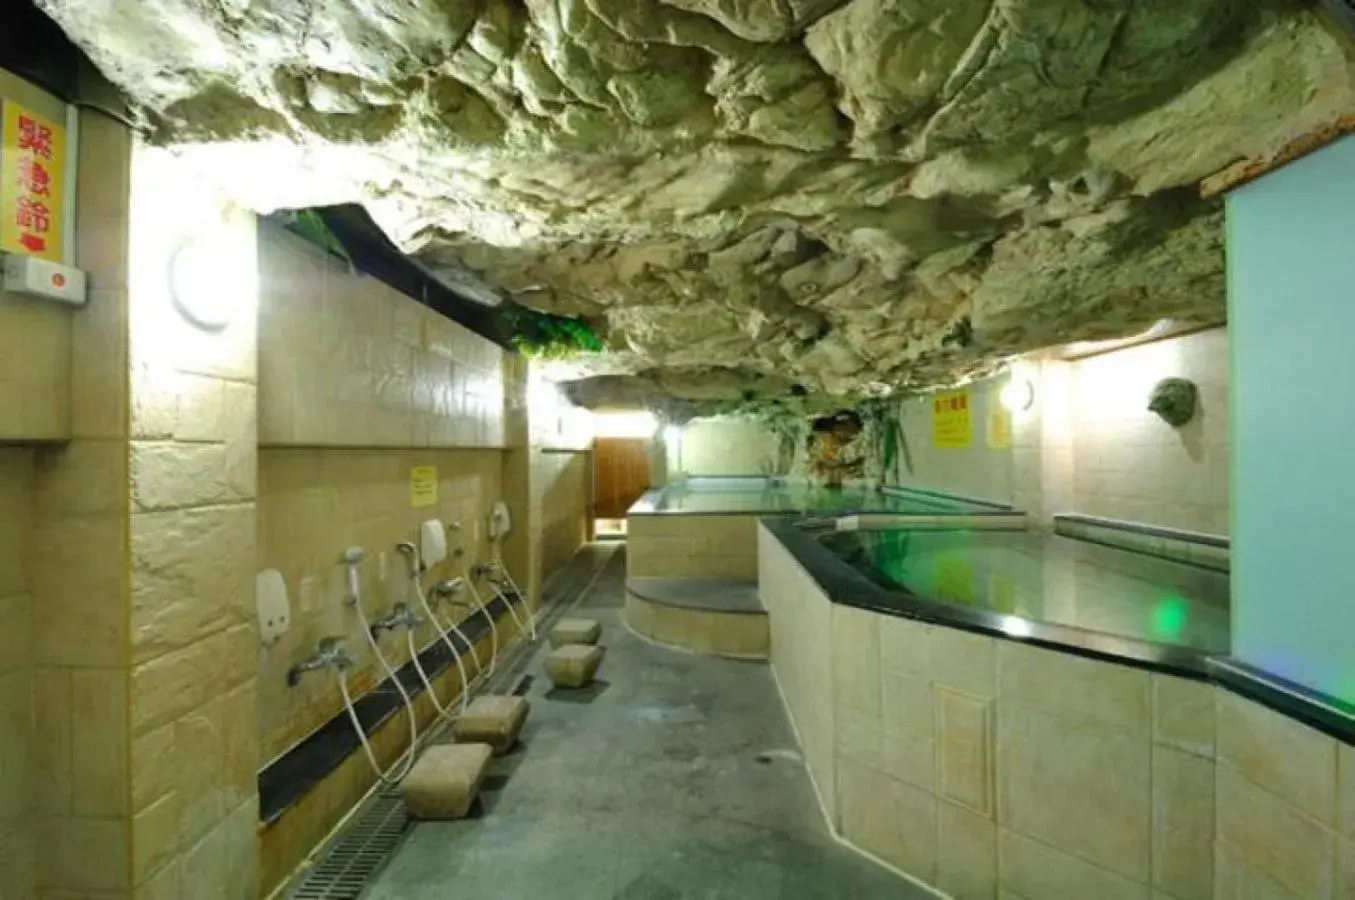 Hot Spring Bath, Swimming Pool in Baron's Hot Spring Hotel